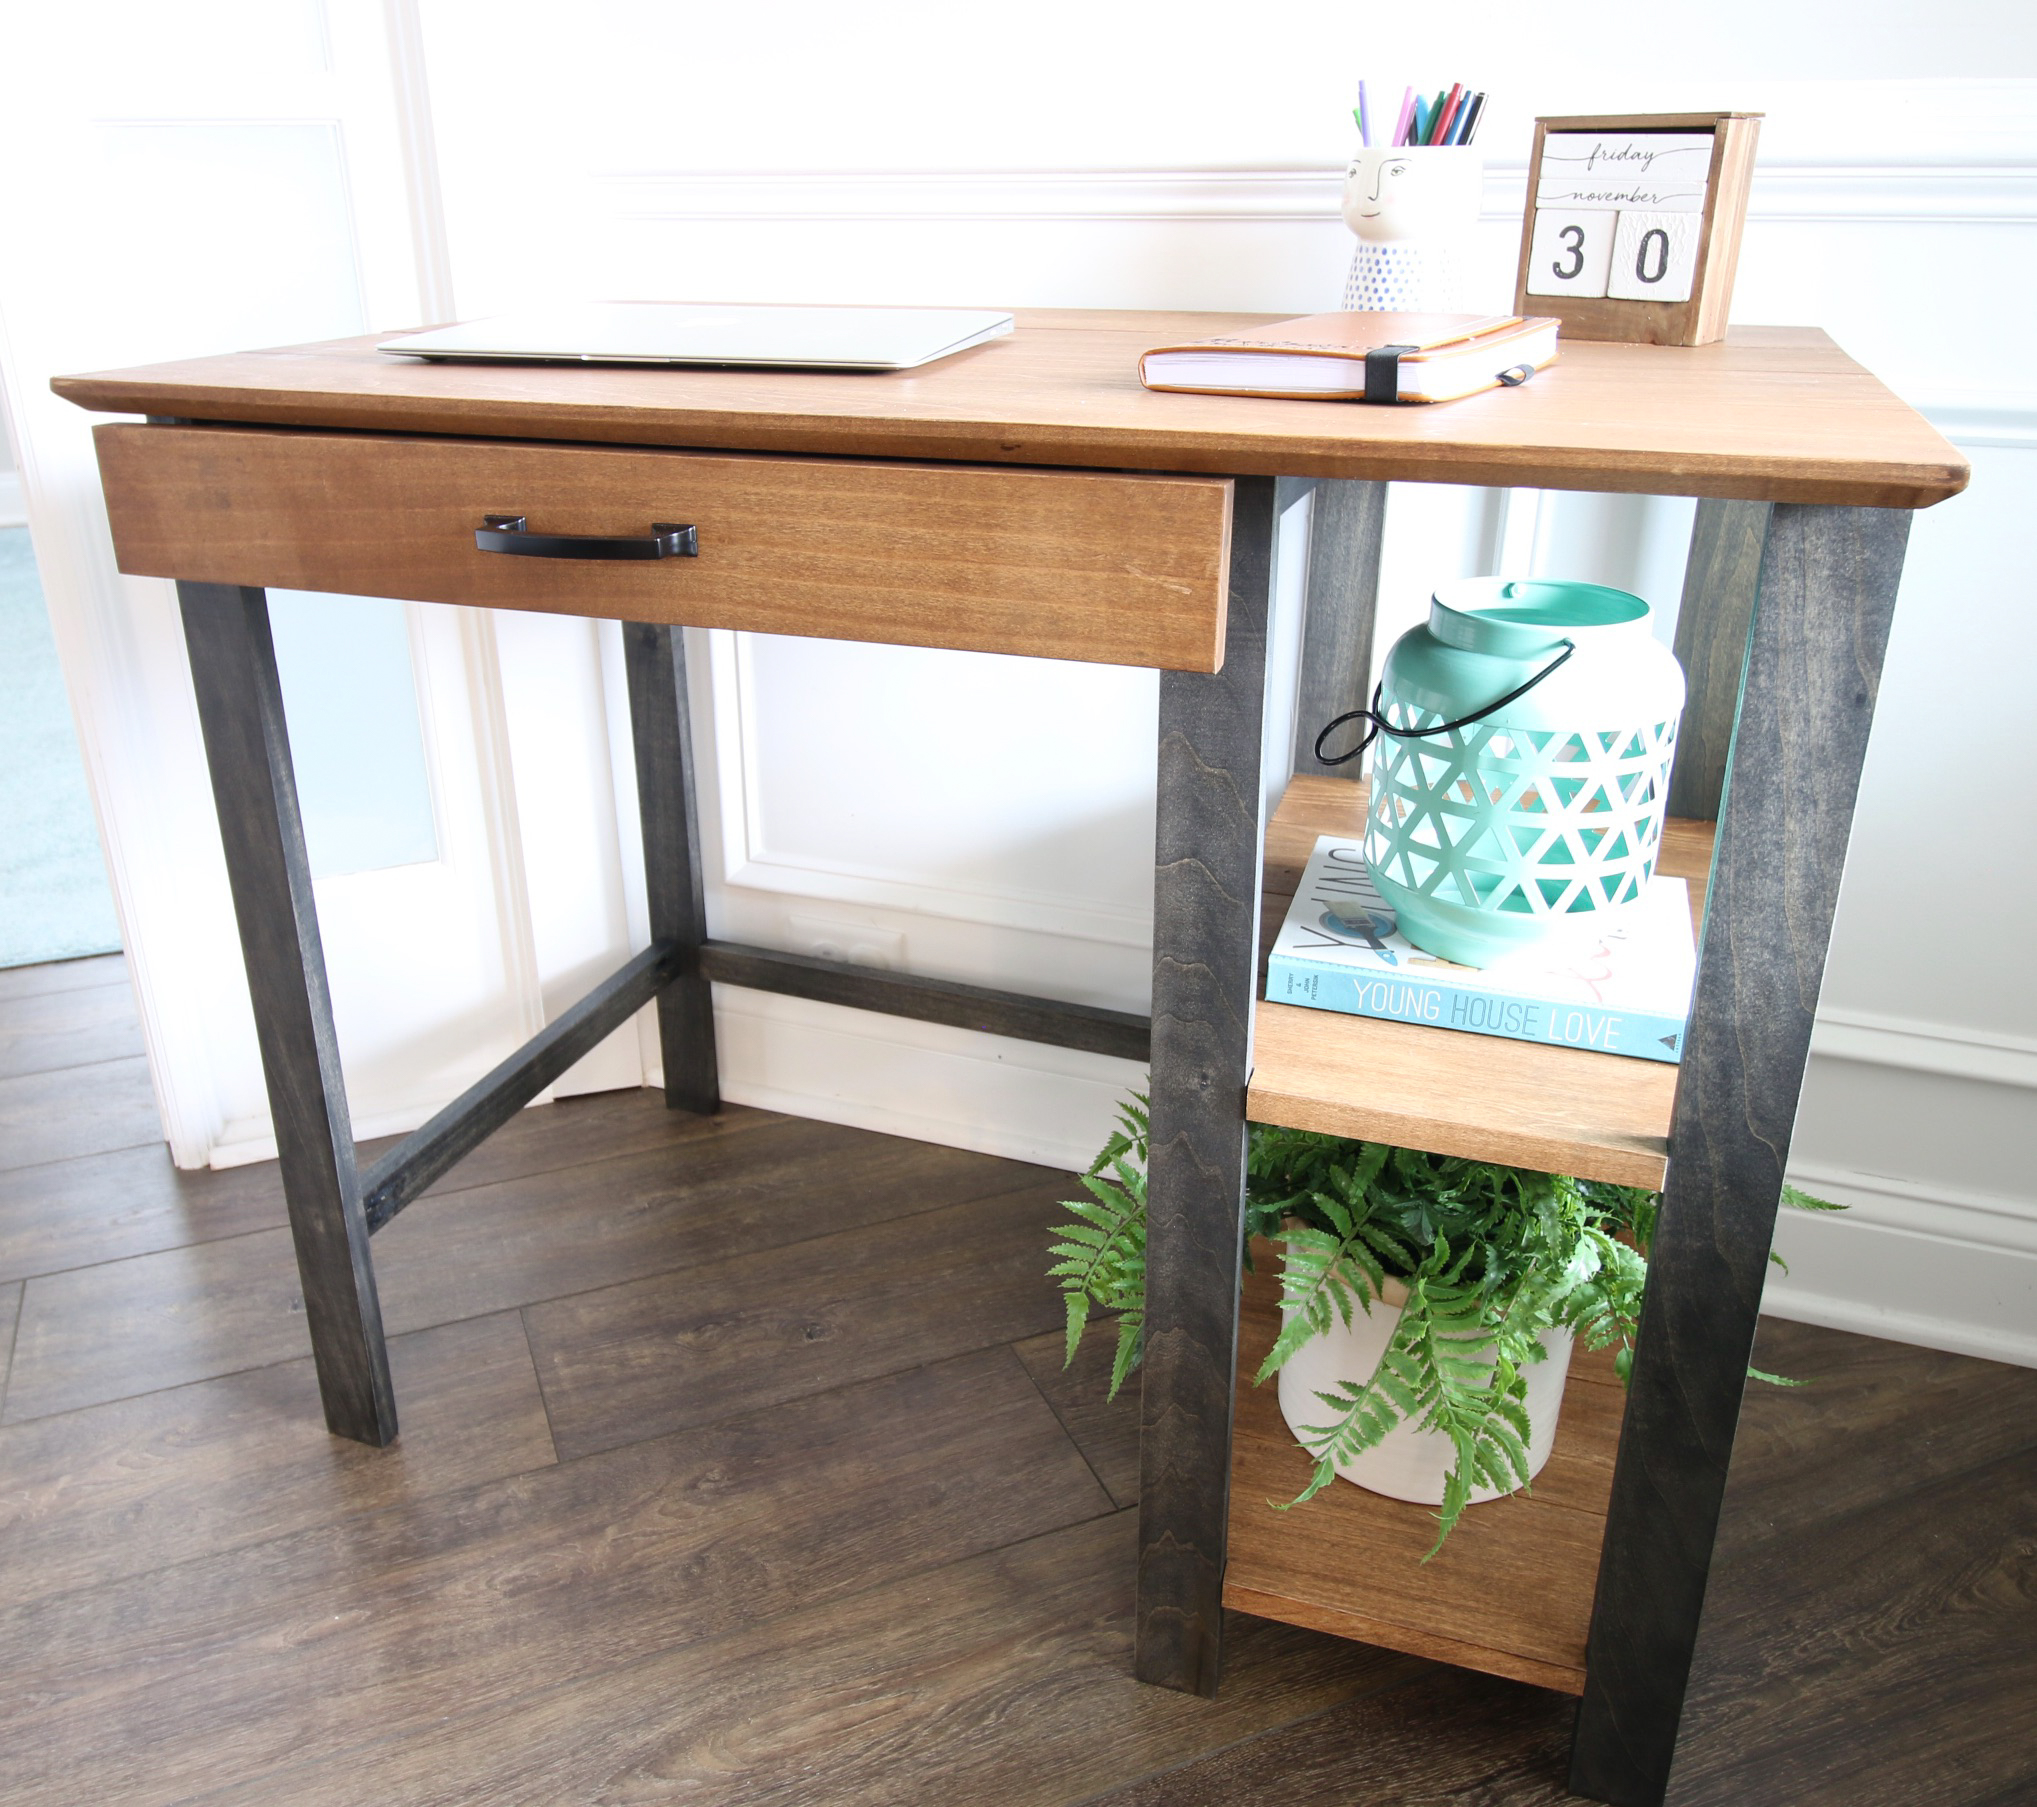 How To Build A Small DIY Writing Desk With Drawer - Part 1 - Addicted 2  Decorating®